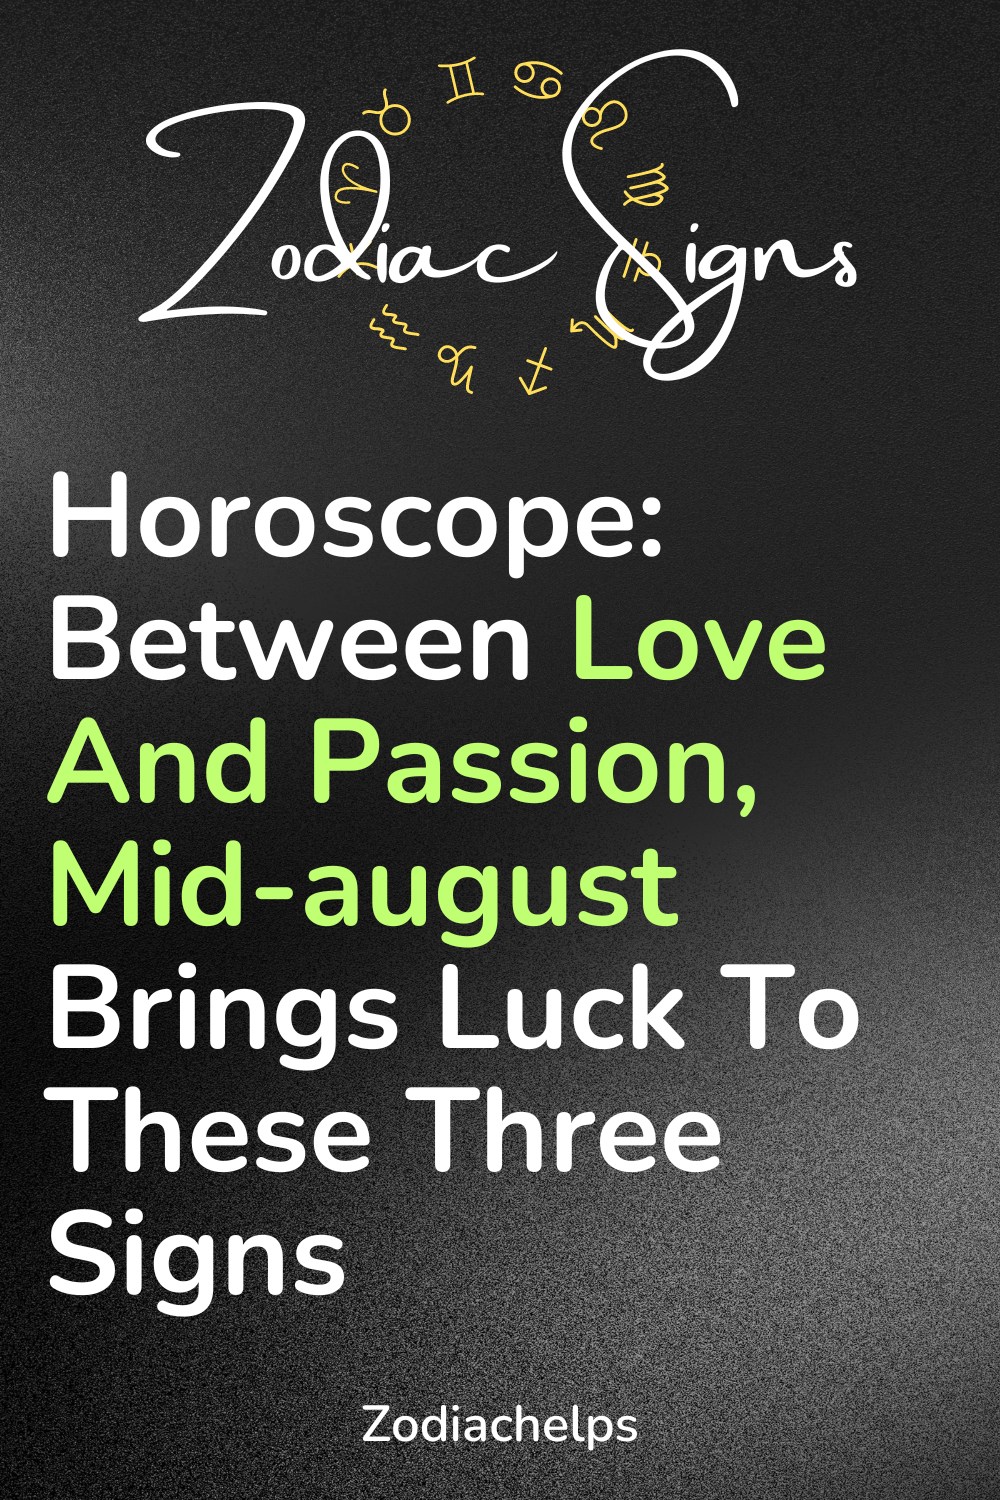 Horoscope: Between Love And Passion, Mid-august Brings Luck To These Three Signs